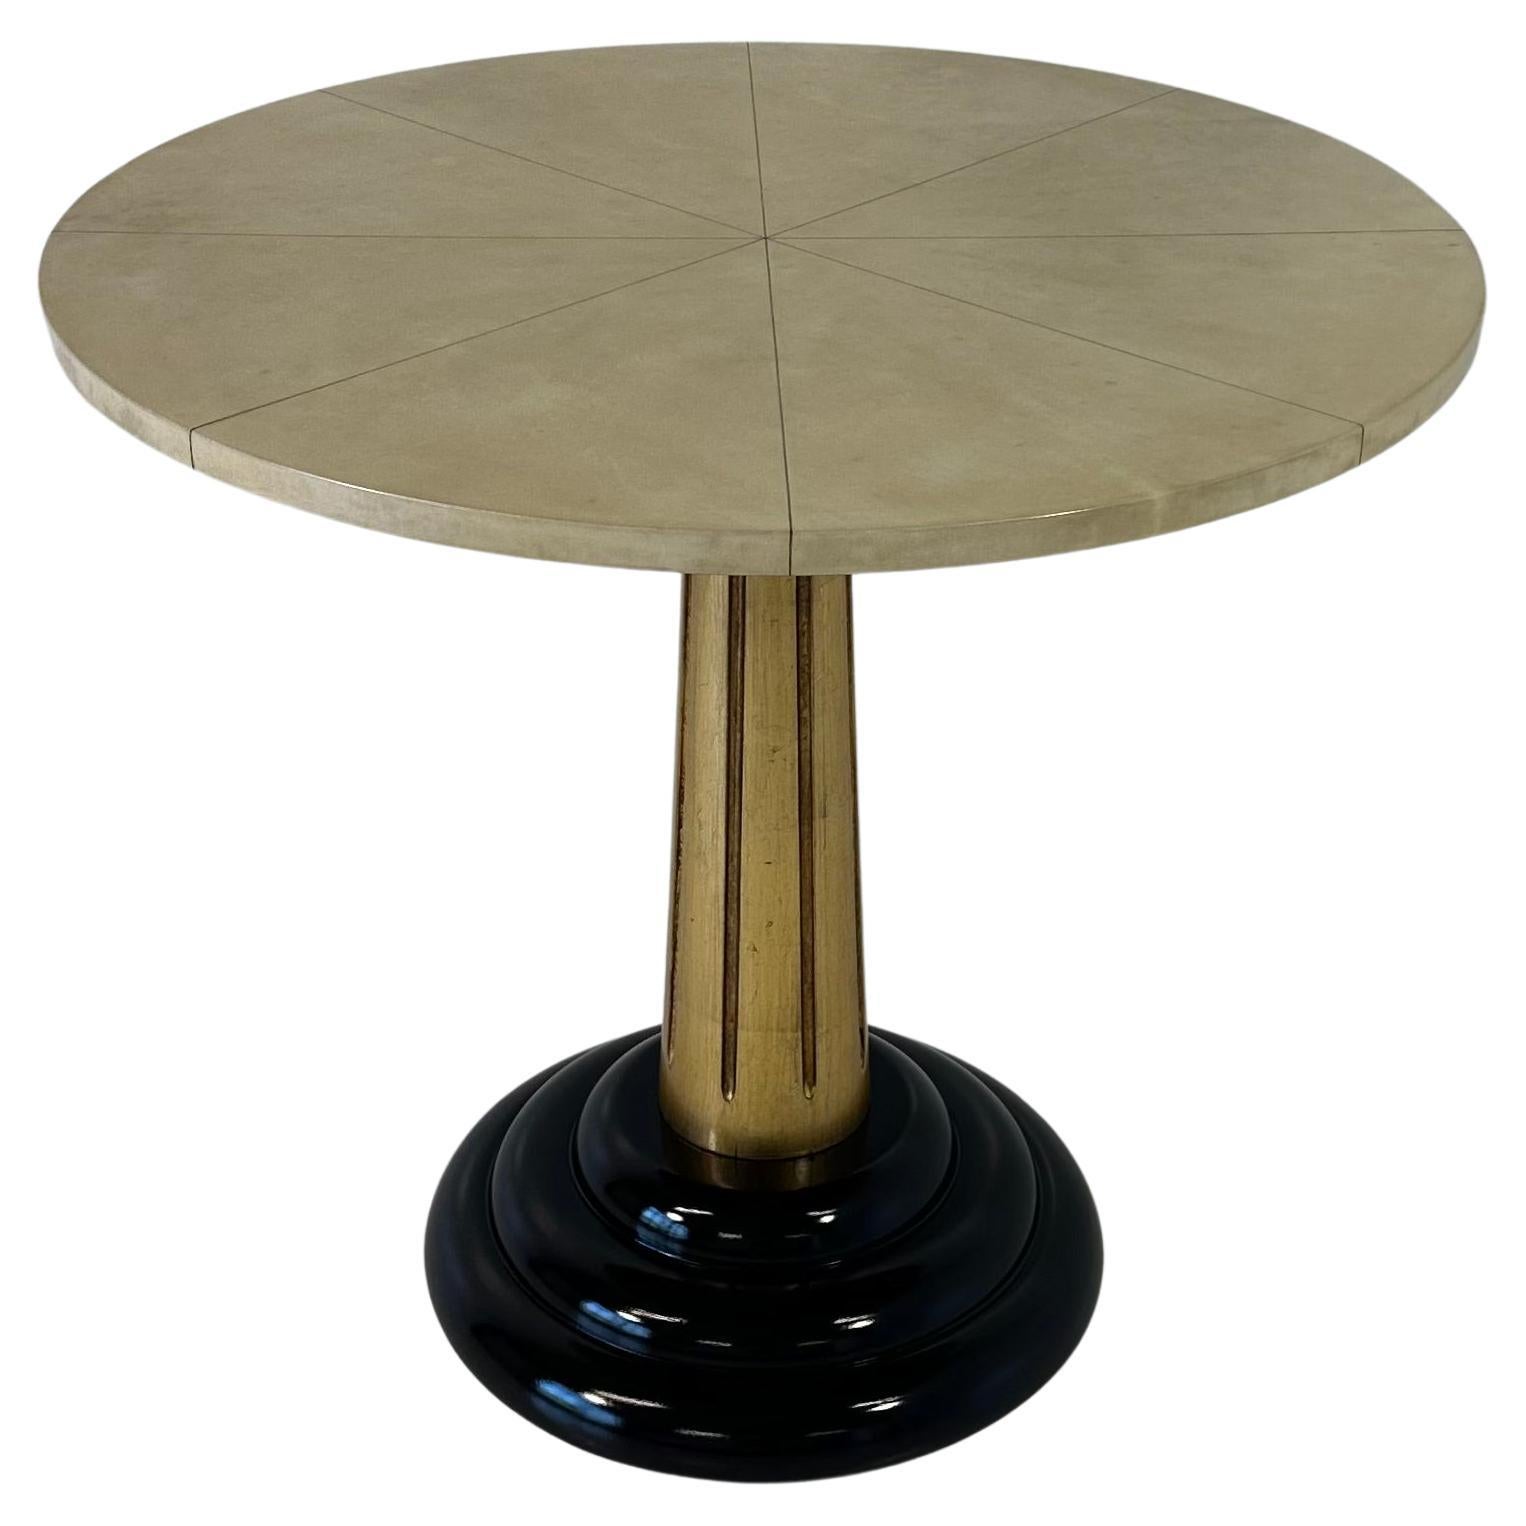 Italian Art Deco Parchment, Gold Leaf and Black Lacquered Coffee Table, 1980s For Sale